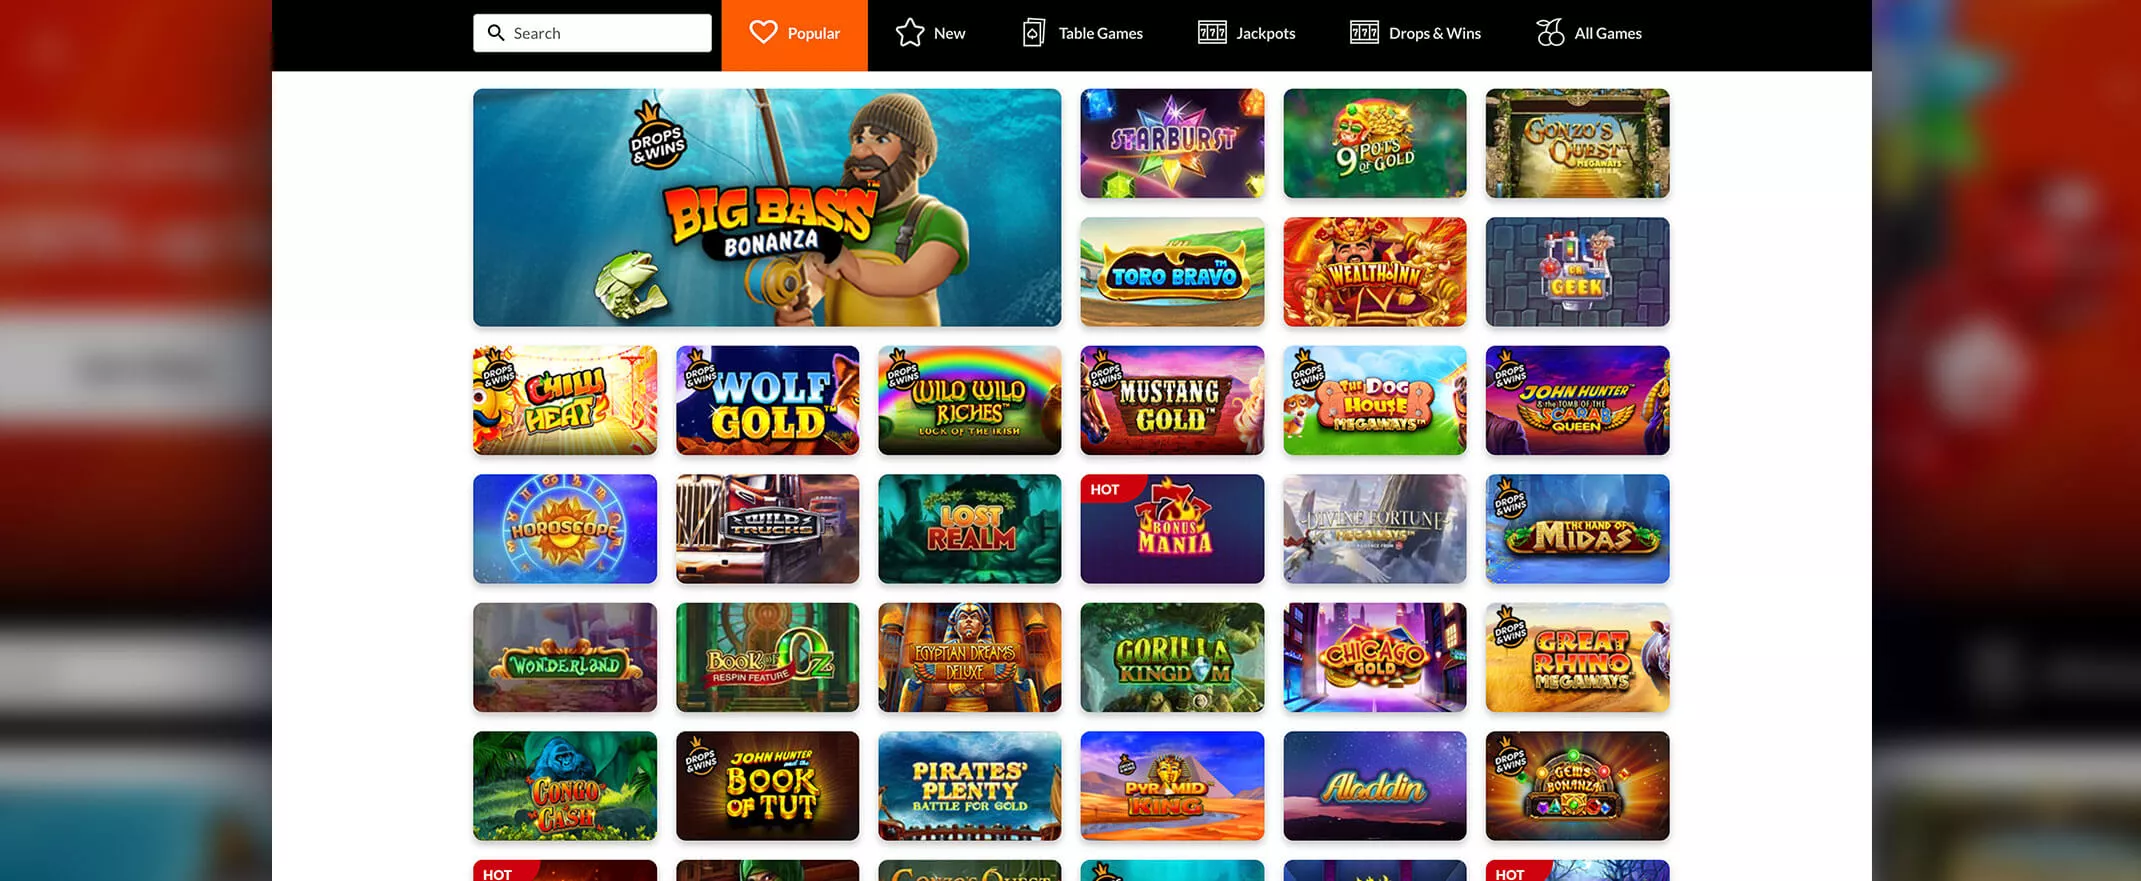 Tiger Riches screenshot of the games